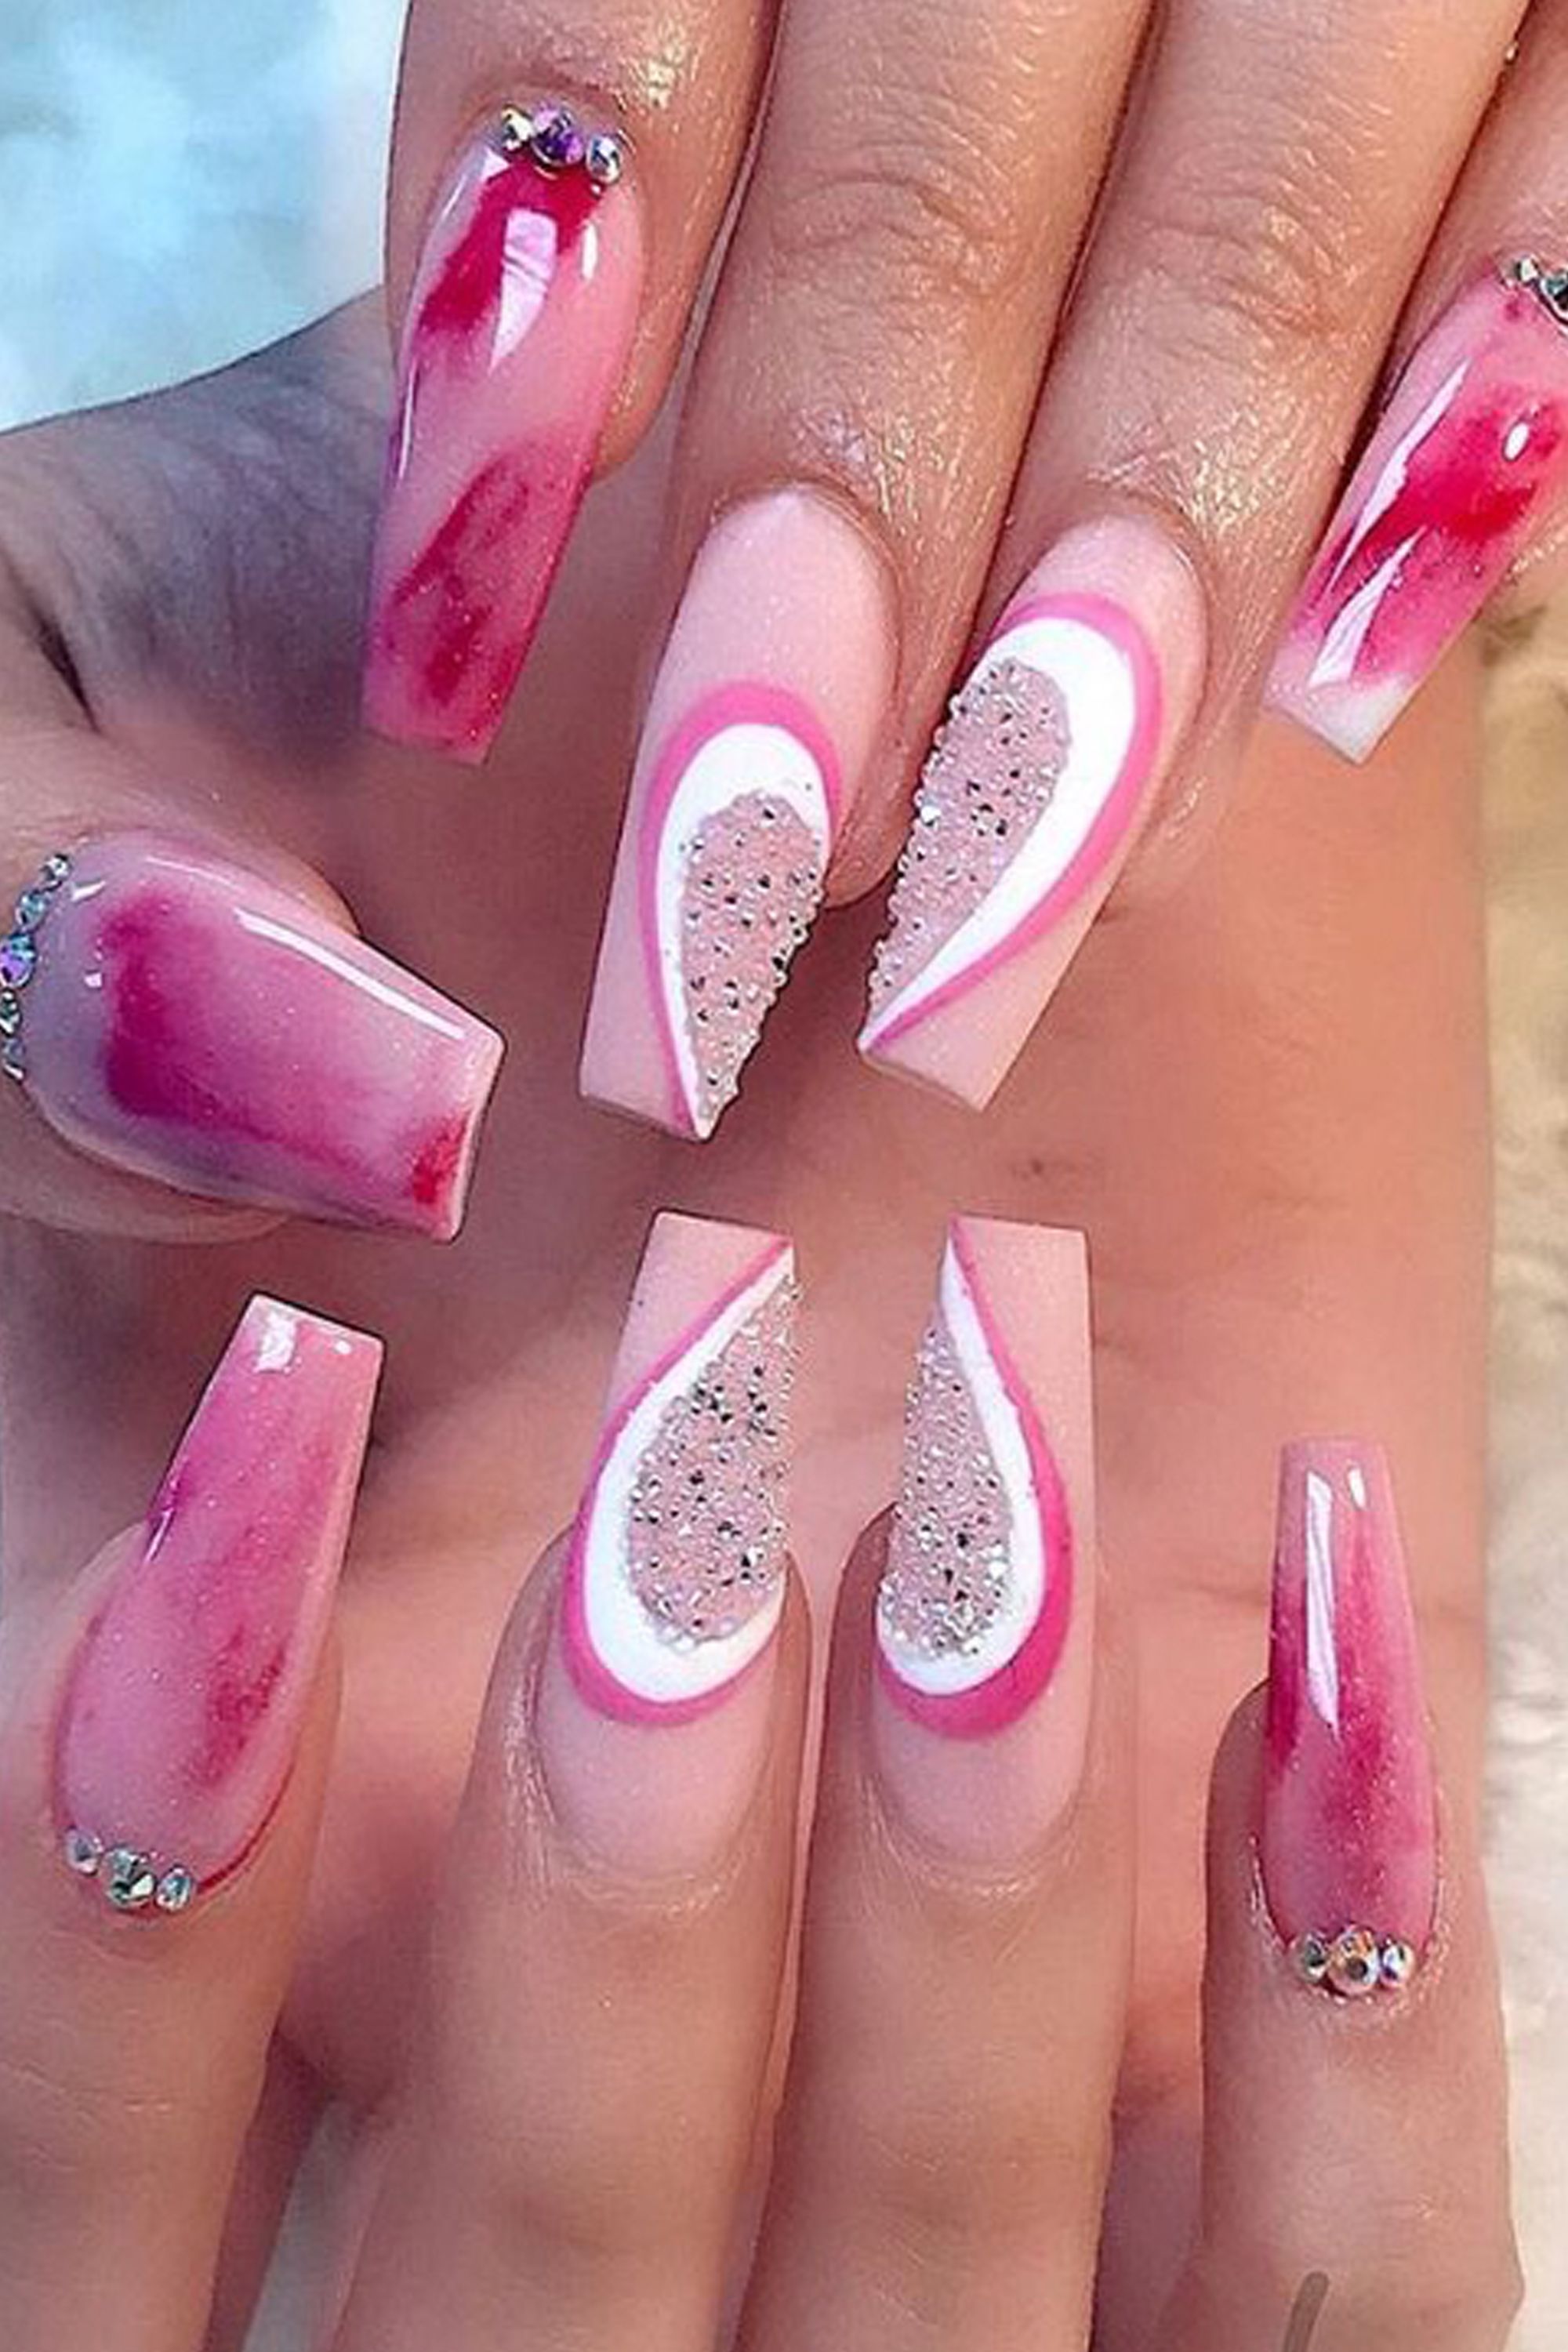 100+ Gel Nail Designs, Best Nails for the best moments